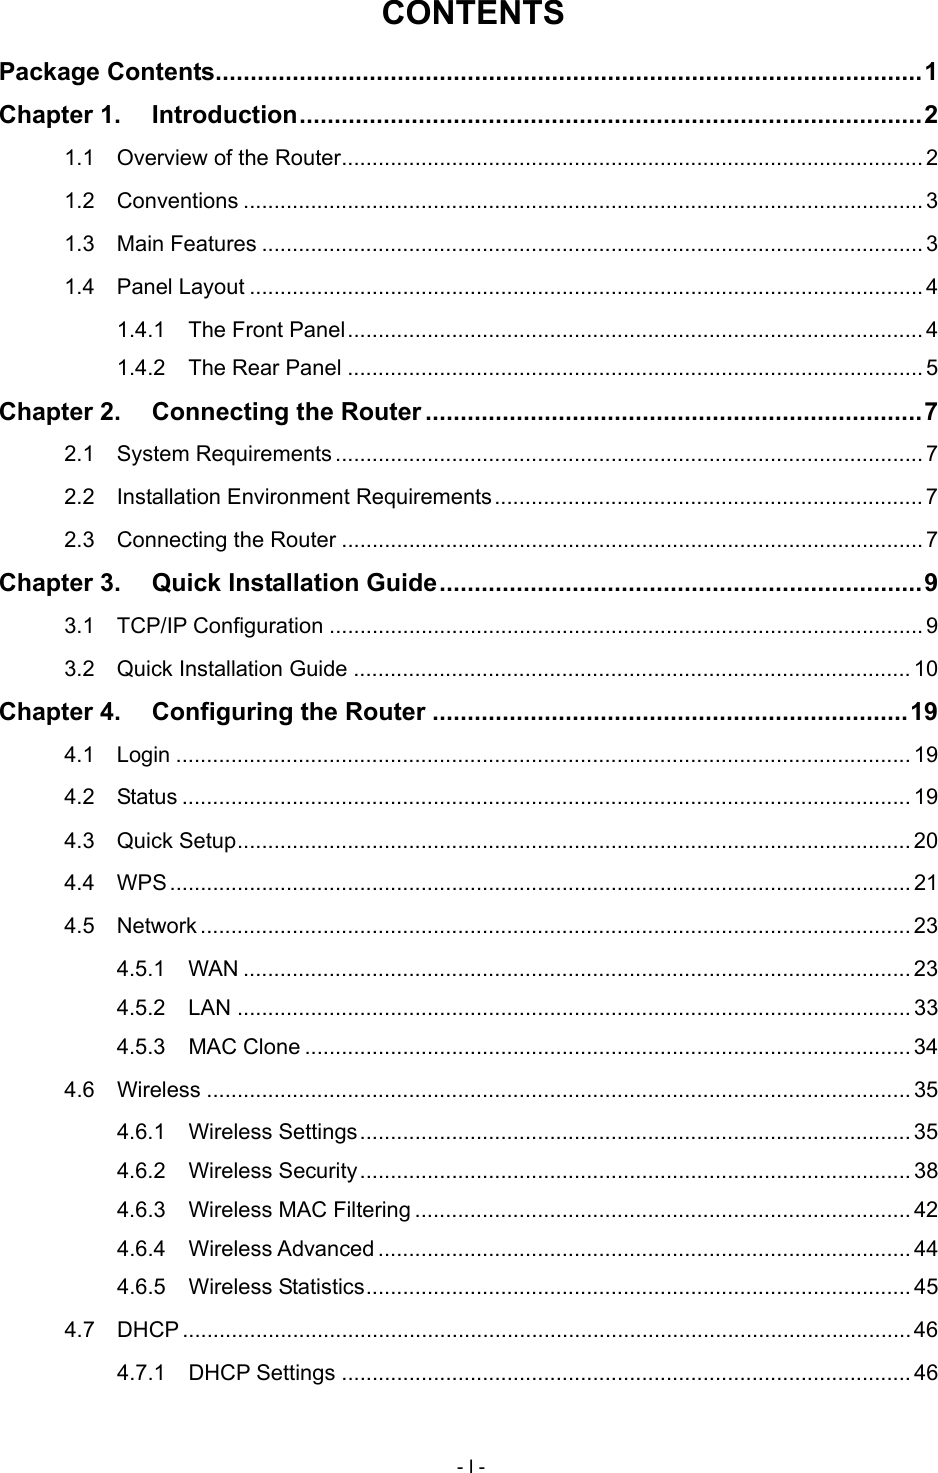  CONTENTS Package Contents.....................................................................................................1 Chapter 1. Introduction.........................................................................................2 1.1 Overview of the Router............................................................................................... 2 1.2 Conventions ...............................................................................................................3 1.3 Main Features ............................................................................................................3 1.4 Panel Layout ..............................................................................................................4 1.4.1 The Front Panel..............................................................................................4 1.4.2 The Rear Panel ..............................................................................................5 Chapter 2. Connecting the Router .......................................................................7 2.1 System Requirements ................................................................................................ 7 2.2 Installation Environment Requirements...................................................................... 7 2.3 Connecting the Router ............................................................................................... 7 Chapter 3. Quick Installation Guide.....................................................................9 3.1 TCP/IP Configuration ................................................................................................. 9 3.2 Quick Installation Guide ........................................................................................... 10 Chapter 4. Configuring the Router ....................................................................19 4.1 Login ........................................................................................................................ 19 4.2 Status ....................................................................................................................... 19 4.3 Quick Setup.............................................................................................................. 20 4.4 WPS ......................................................................................................................... 21 4.5 Network .................................................................................................................... 23 4.5.1 WAN ............................................................................................................. 23 4.5.2 LAN .............................................................................................................. 33 4.5.3 MAC Clone ................................................................................................... 34 4.6 Wireless ................................................................................................................... 35 4.6.1 Wireless Settings.......................................................................................... 35 4.6.2 Wireless Security.......................................................................................... 38 4.6.3 Wireless MAC Filtering ................................................................................. 42 4.6.4 Wireless Advanced ....................................................................................... 44 4.6.5 Wireless Statistics......................................................................................... 45 4.7 DHCP .......................................................................................................................46 4.7.1 DHCP Settings ............................................................................................. 46 - I - 